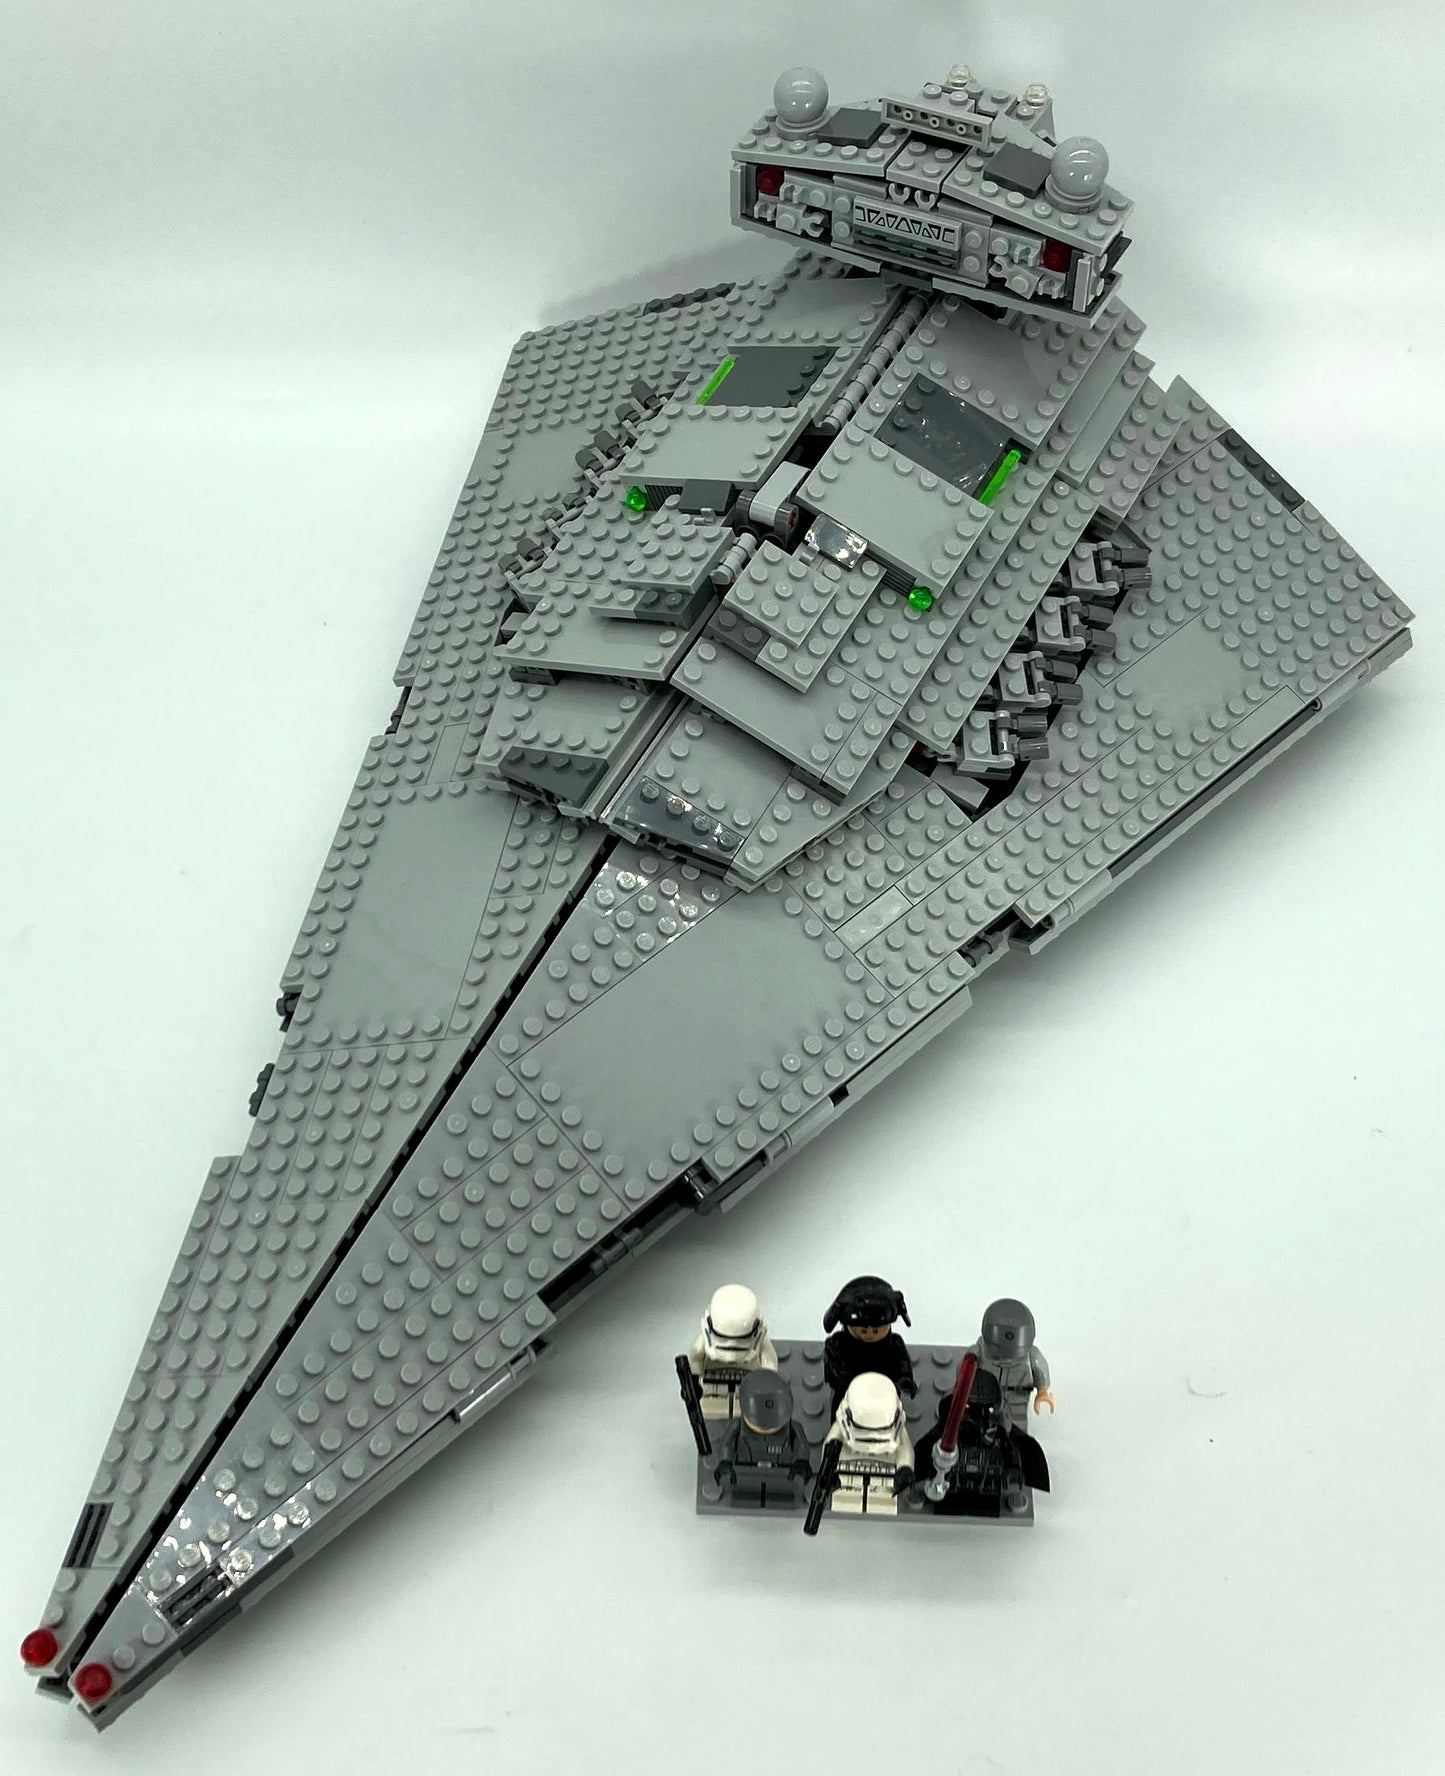 Used Set 75055 Imperial Star Destroyer (No Instruction Manual or Box)